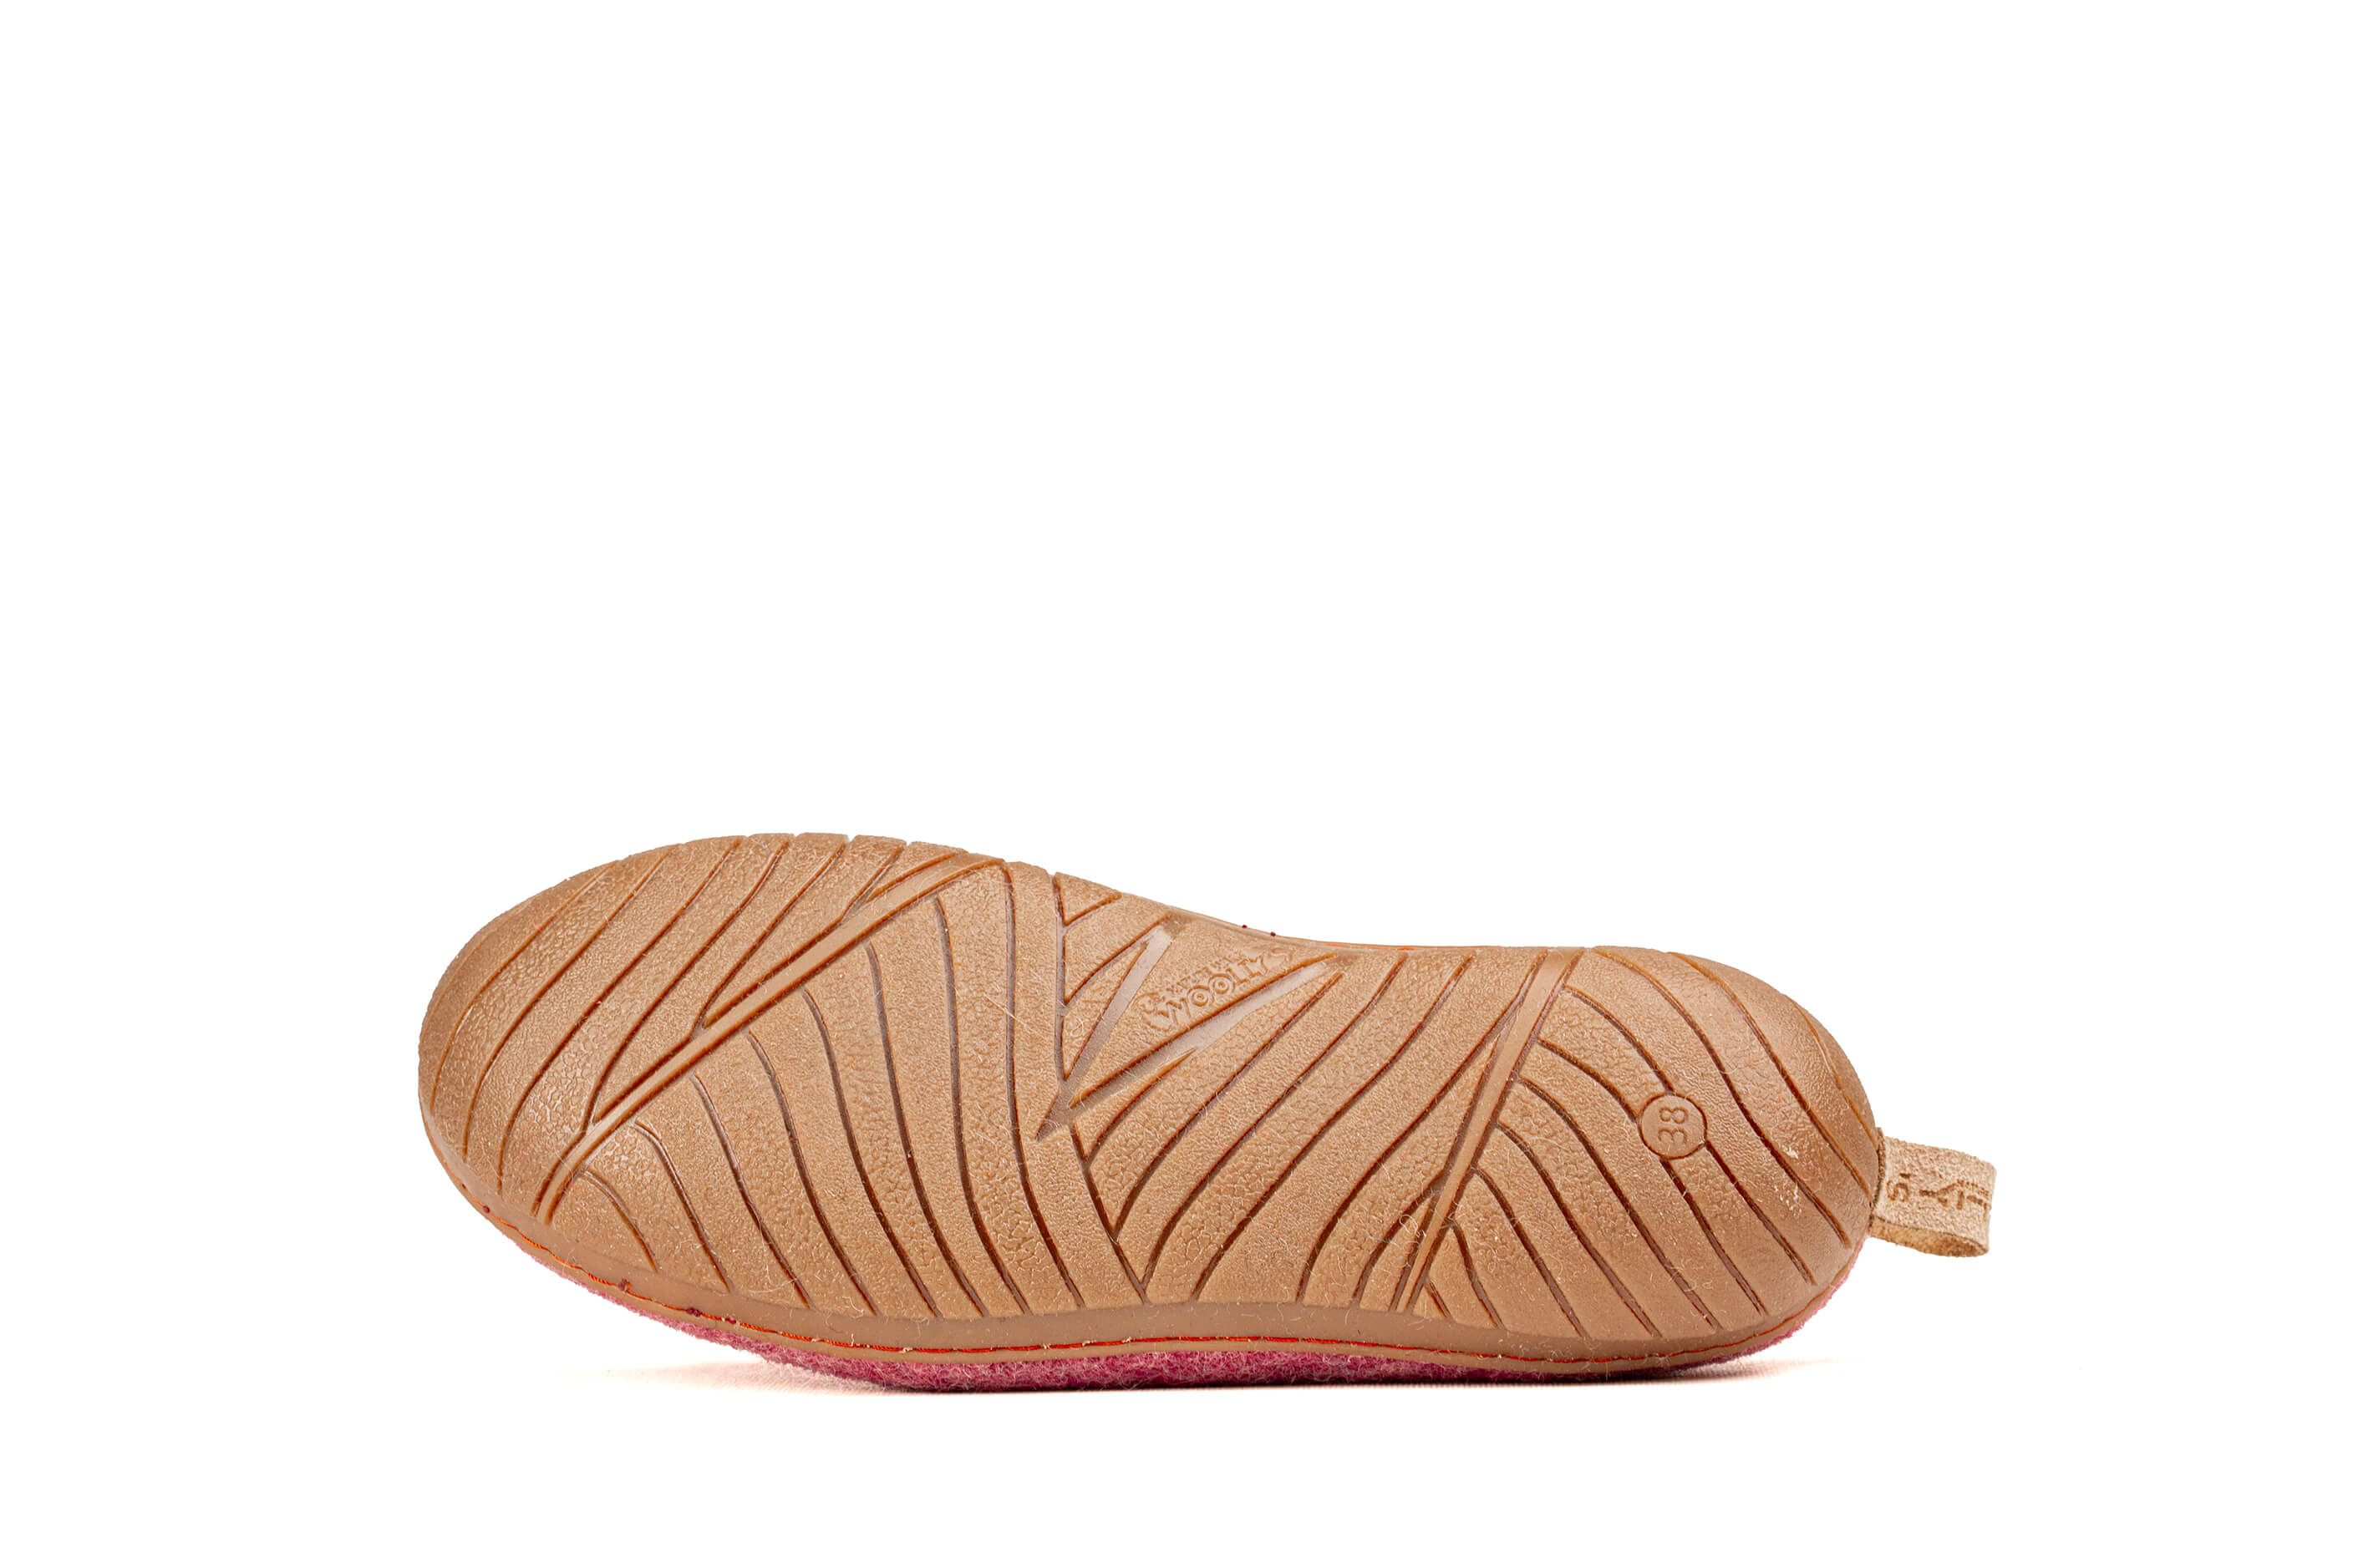 Outdoor Open Heel Slippers With Rubber Sole - Cherry Pink